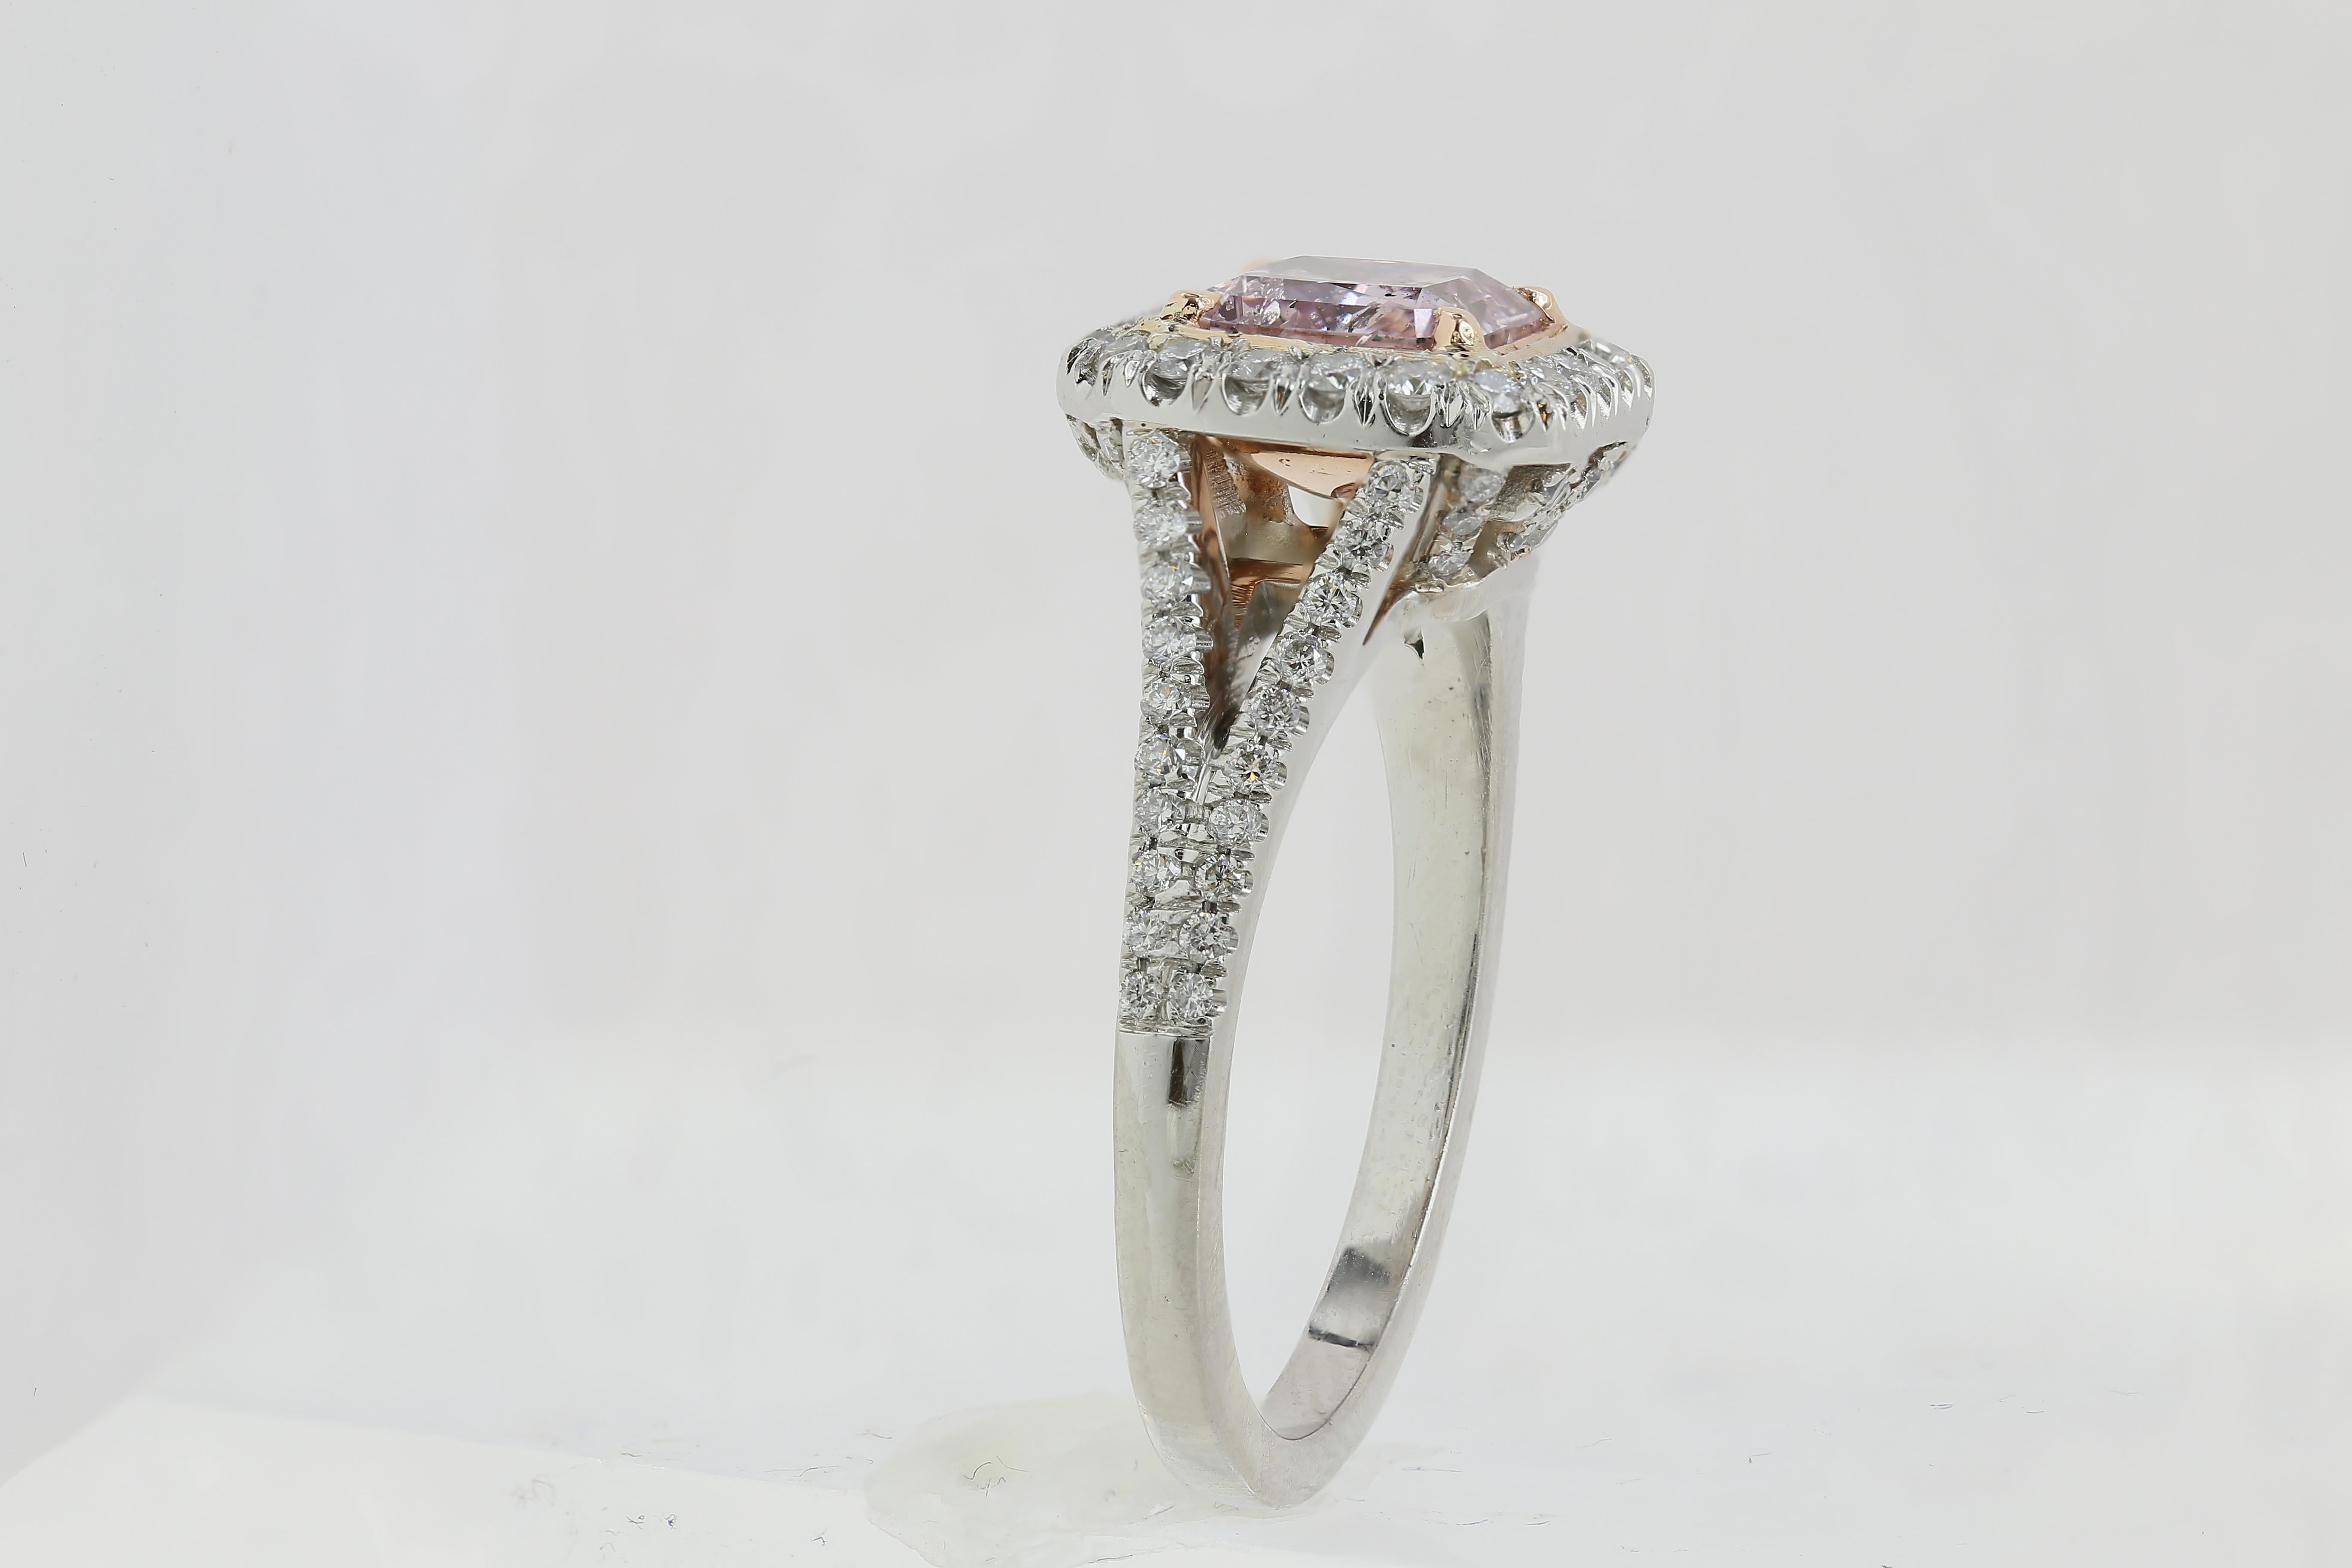 GIA cetified 1.40 ct Fancy Purple-Pink Radiant Diamond cert# 2145794129 w/ Halo Setting, set in 18kt Rose Gold and Platinum.  Split shank with diamonds extending halfway down shank, with decorative scrolling in pave beneath.